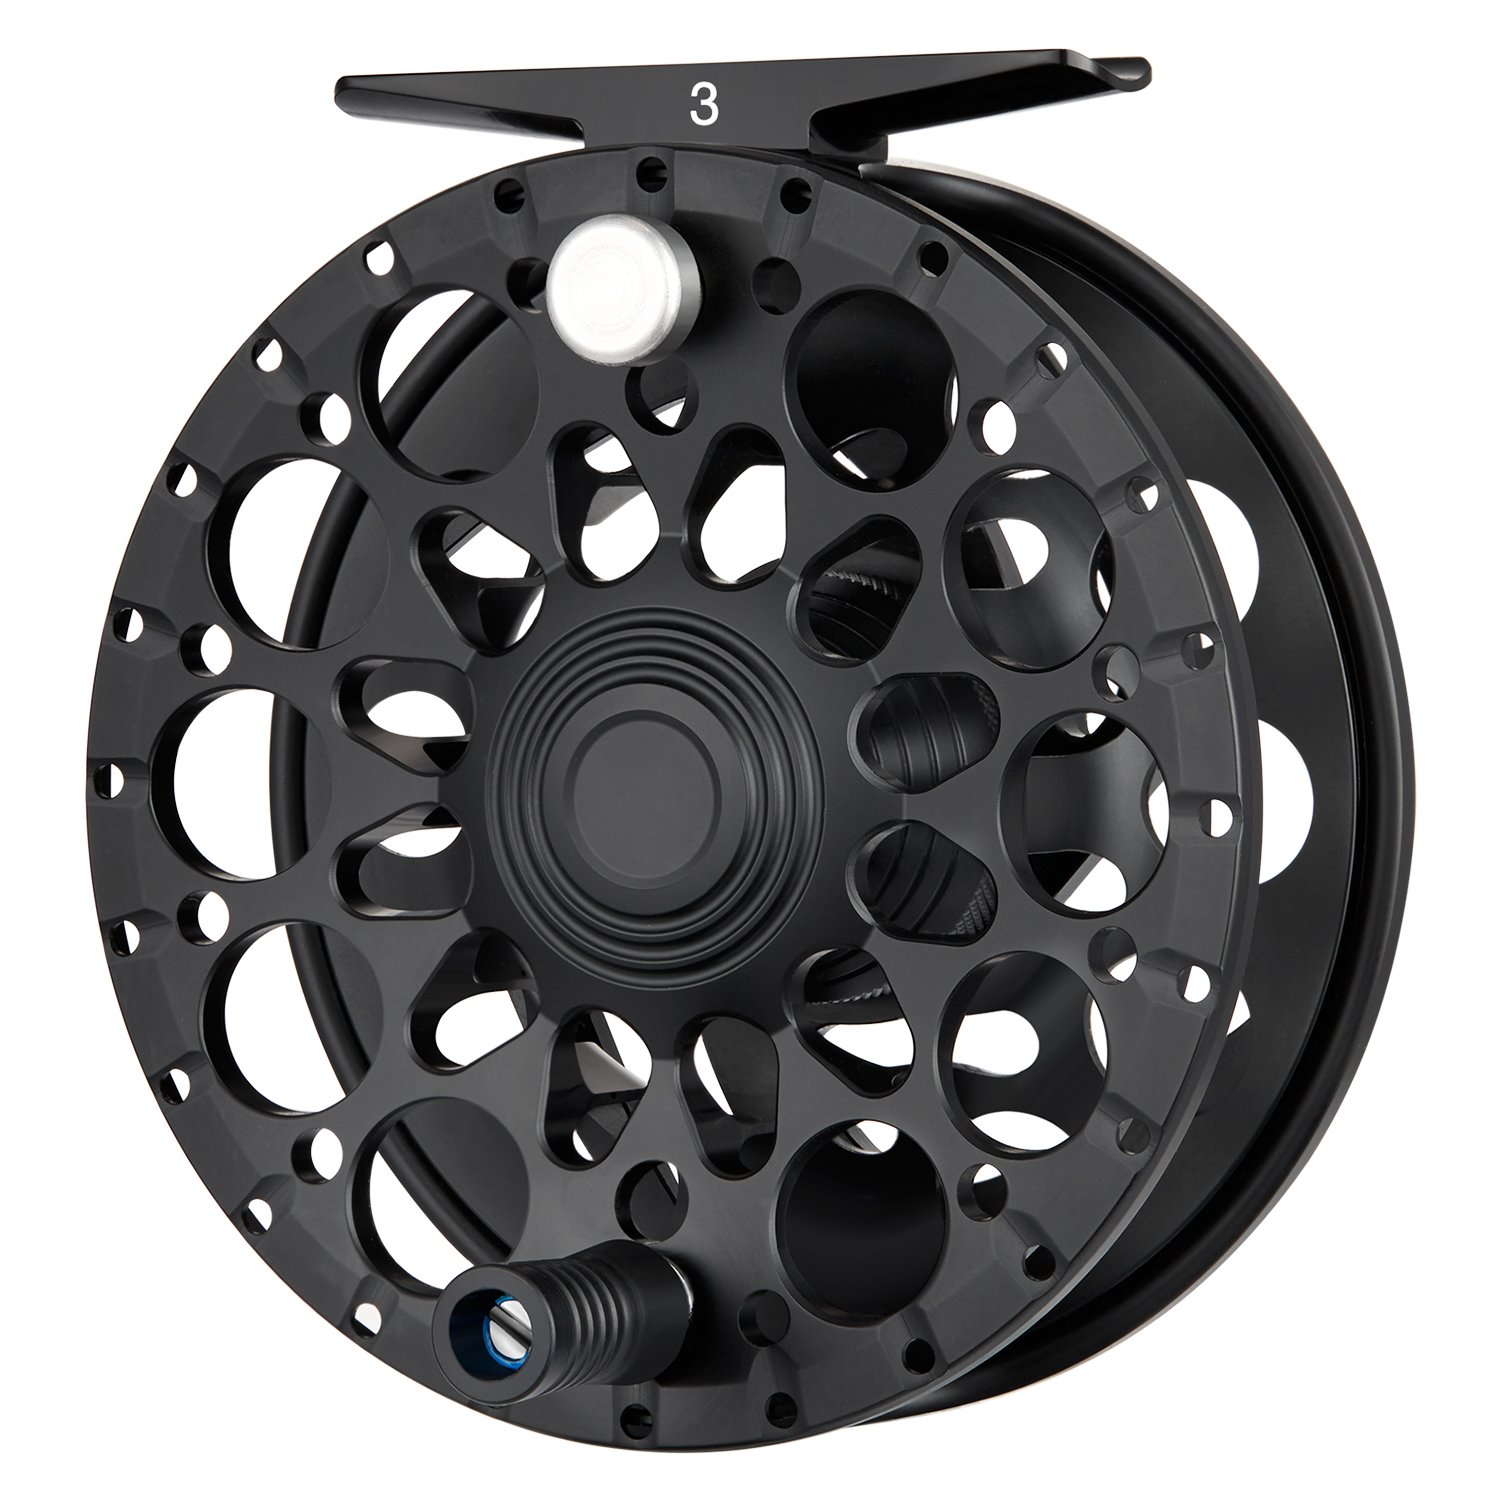 Piscifun Platte Pro Fly Reel with Full-Sized Drag Knob, CNC